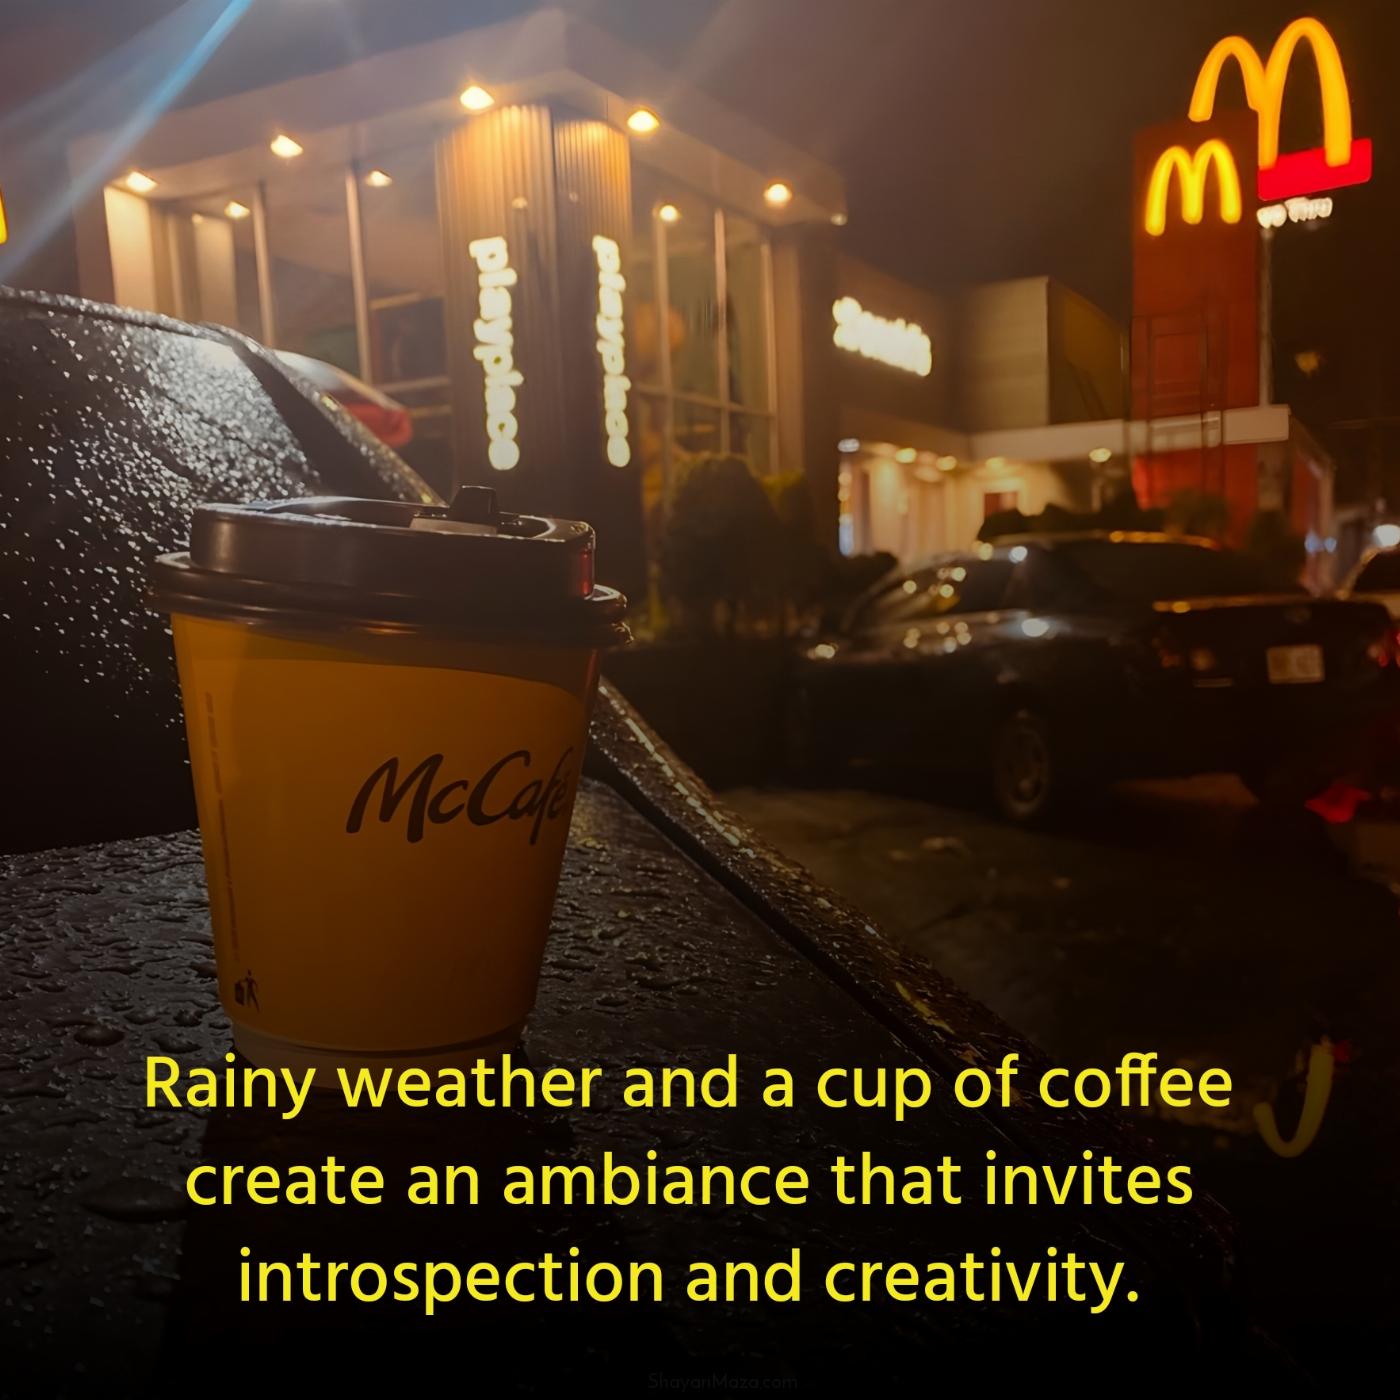 Rainy weather and a cup of coffee create an ambiance